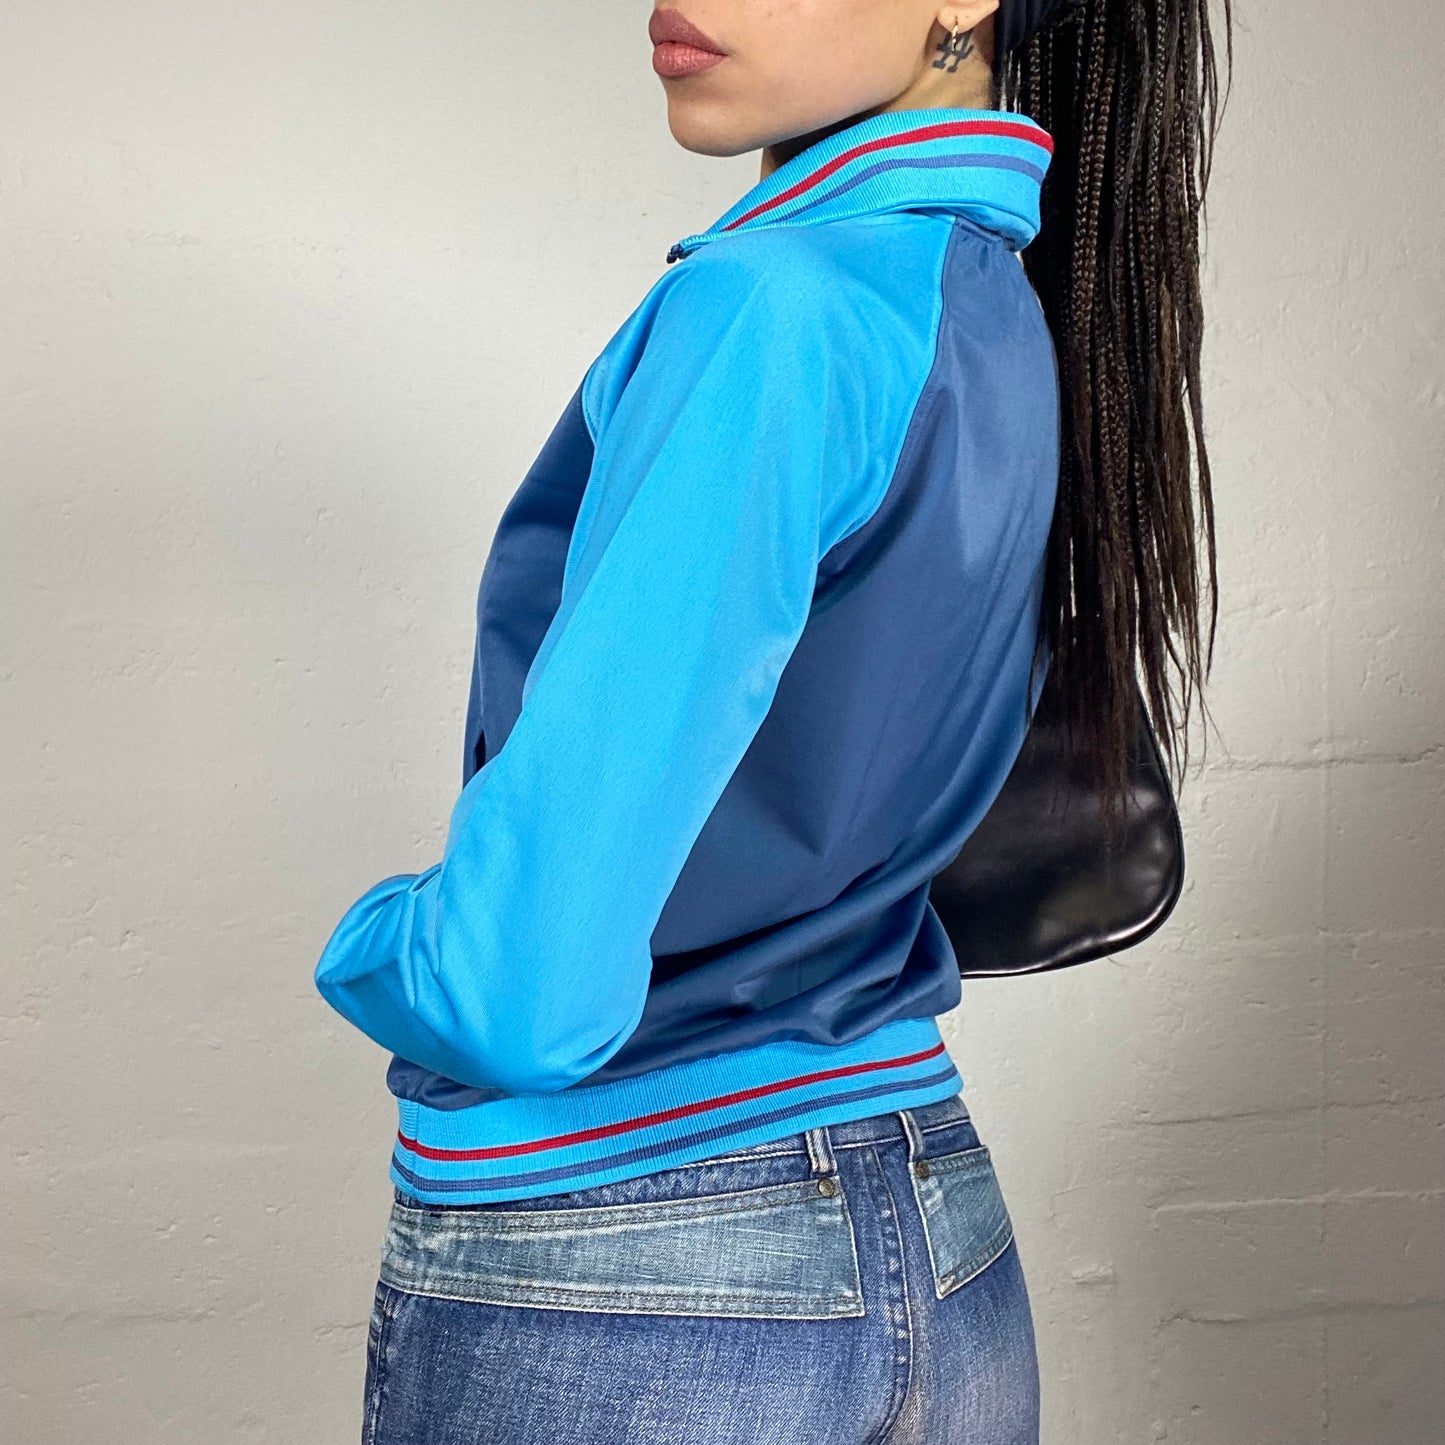 Vintage 2000's Converse Sporty Blue Zip Up Sweater with Blue Contrast Sleeves Detail (M)